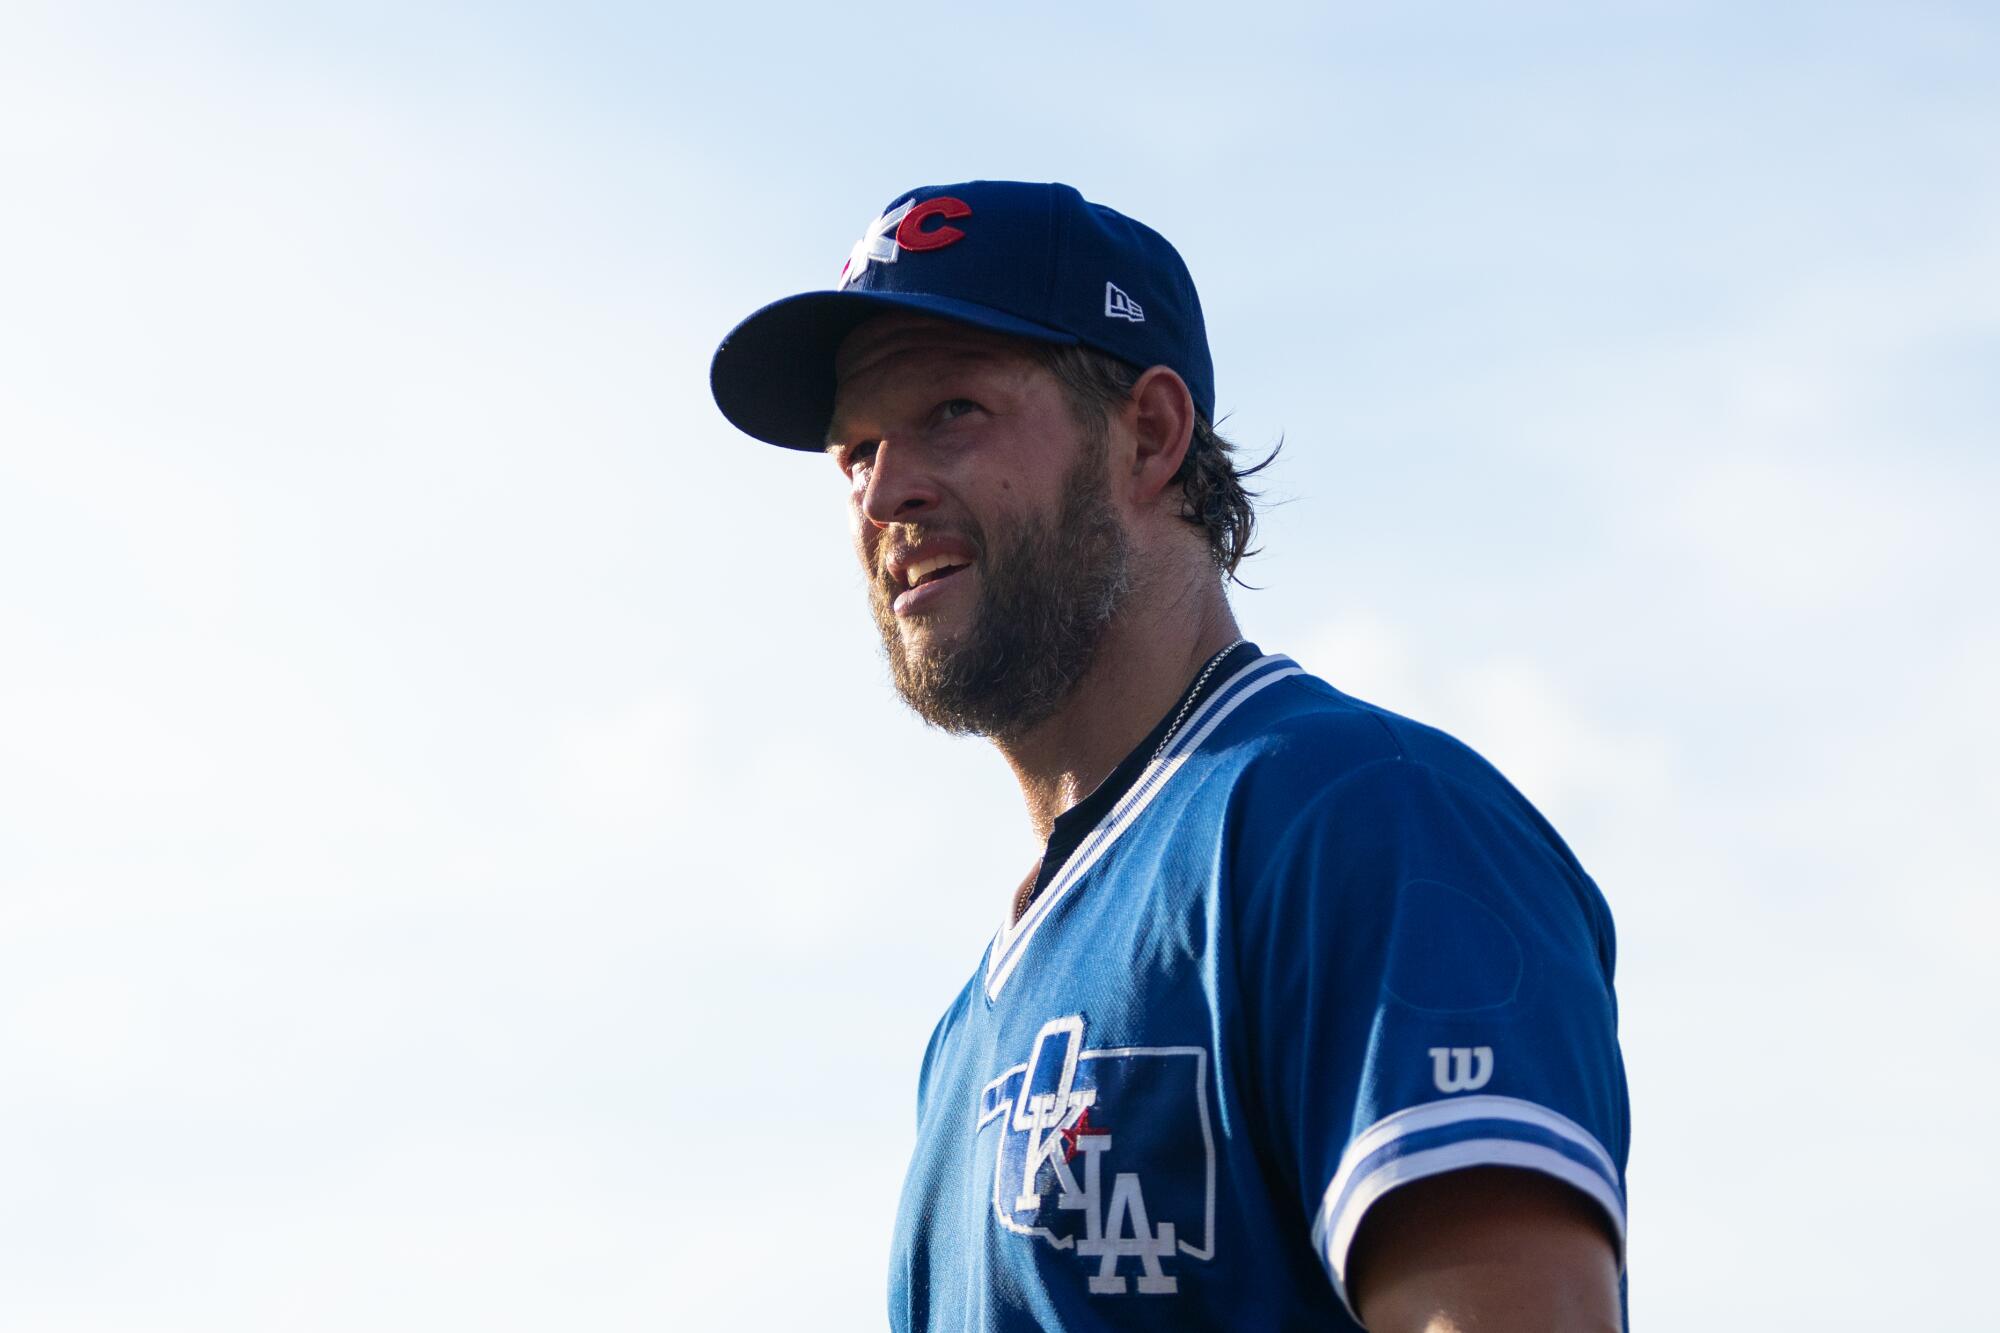 Clayton Kershaw warming up before his final rehabilitation start for Oklahoma City in Round Rock, Texas, last Friday.